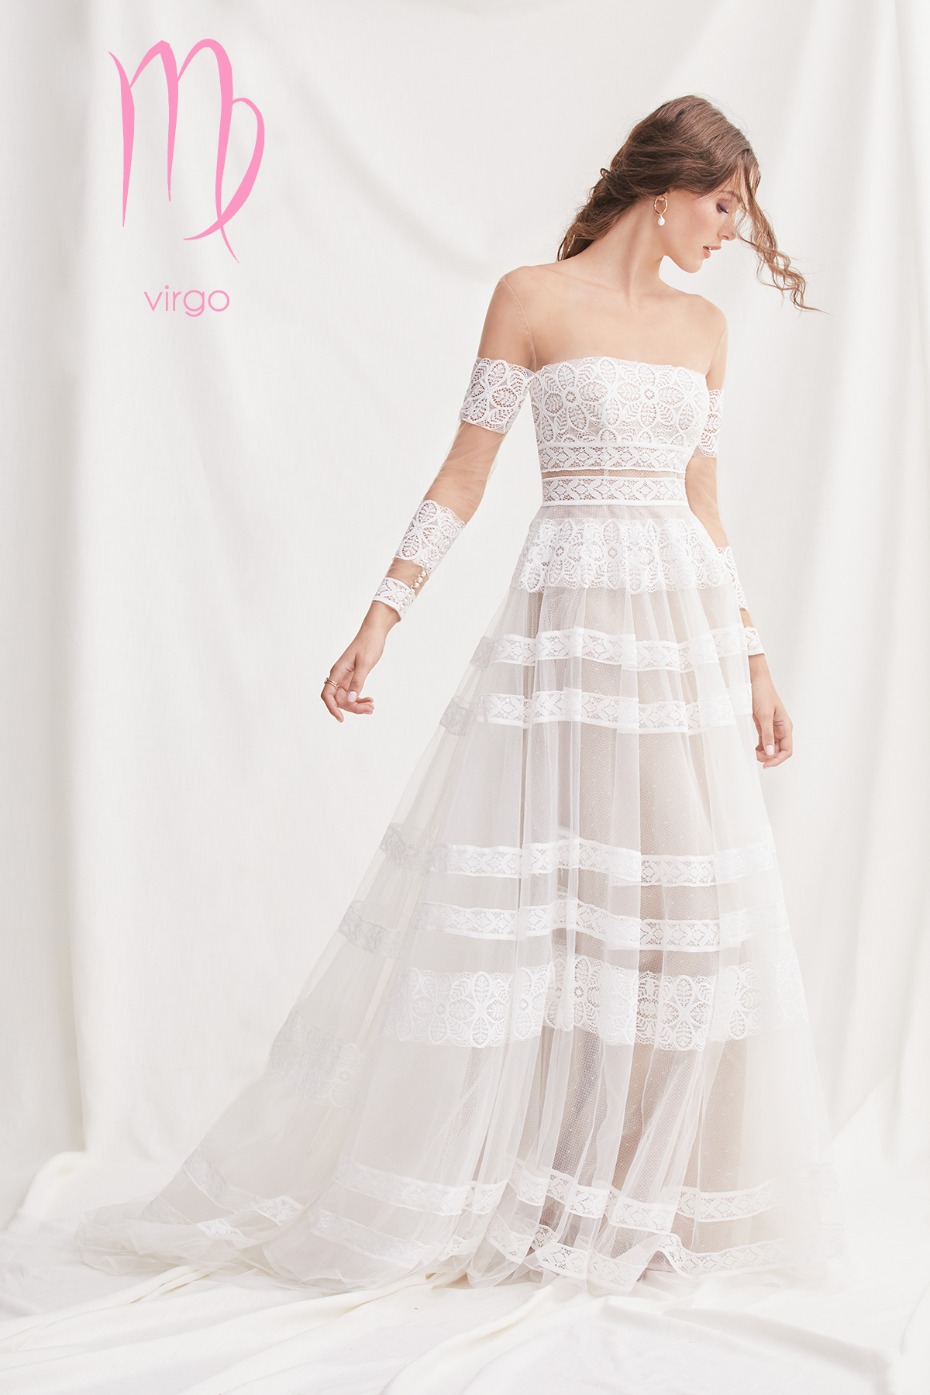 boho inspired gown perfect for the virgo Zodiac